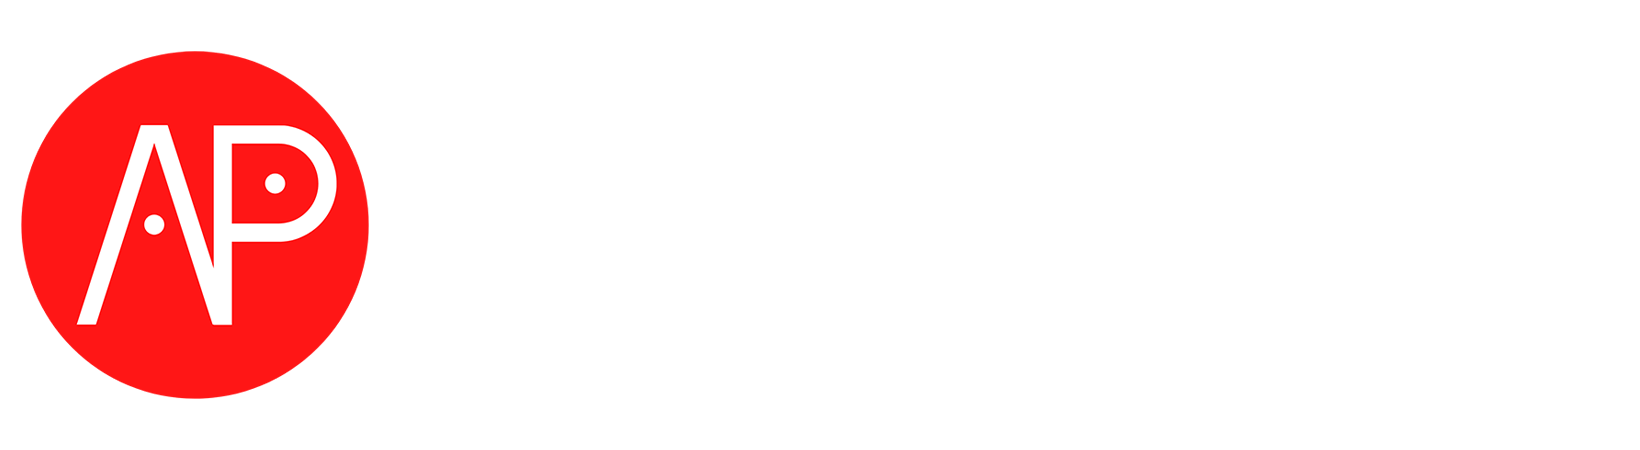 Astra Prospects